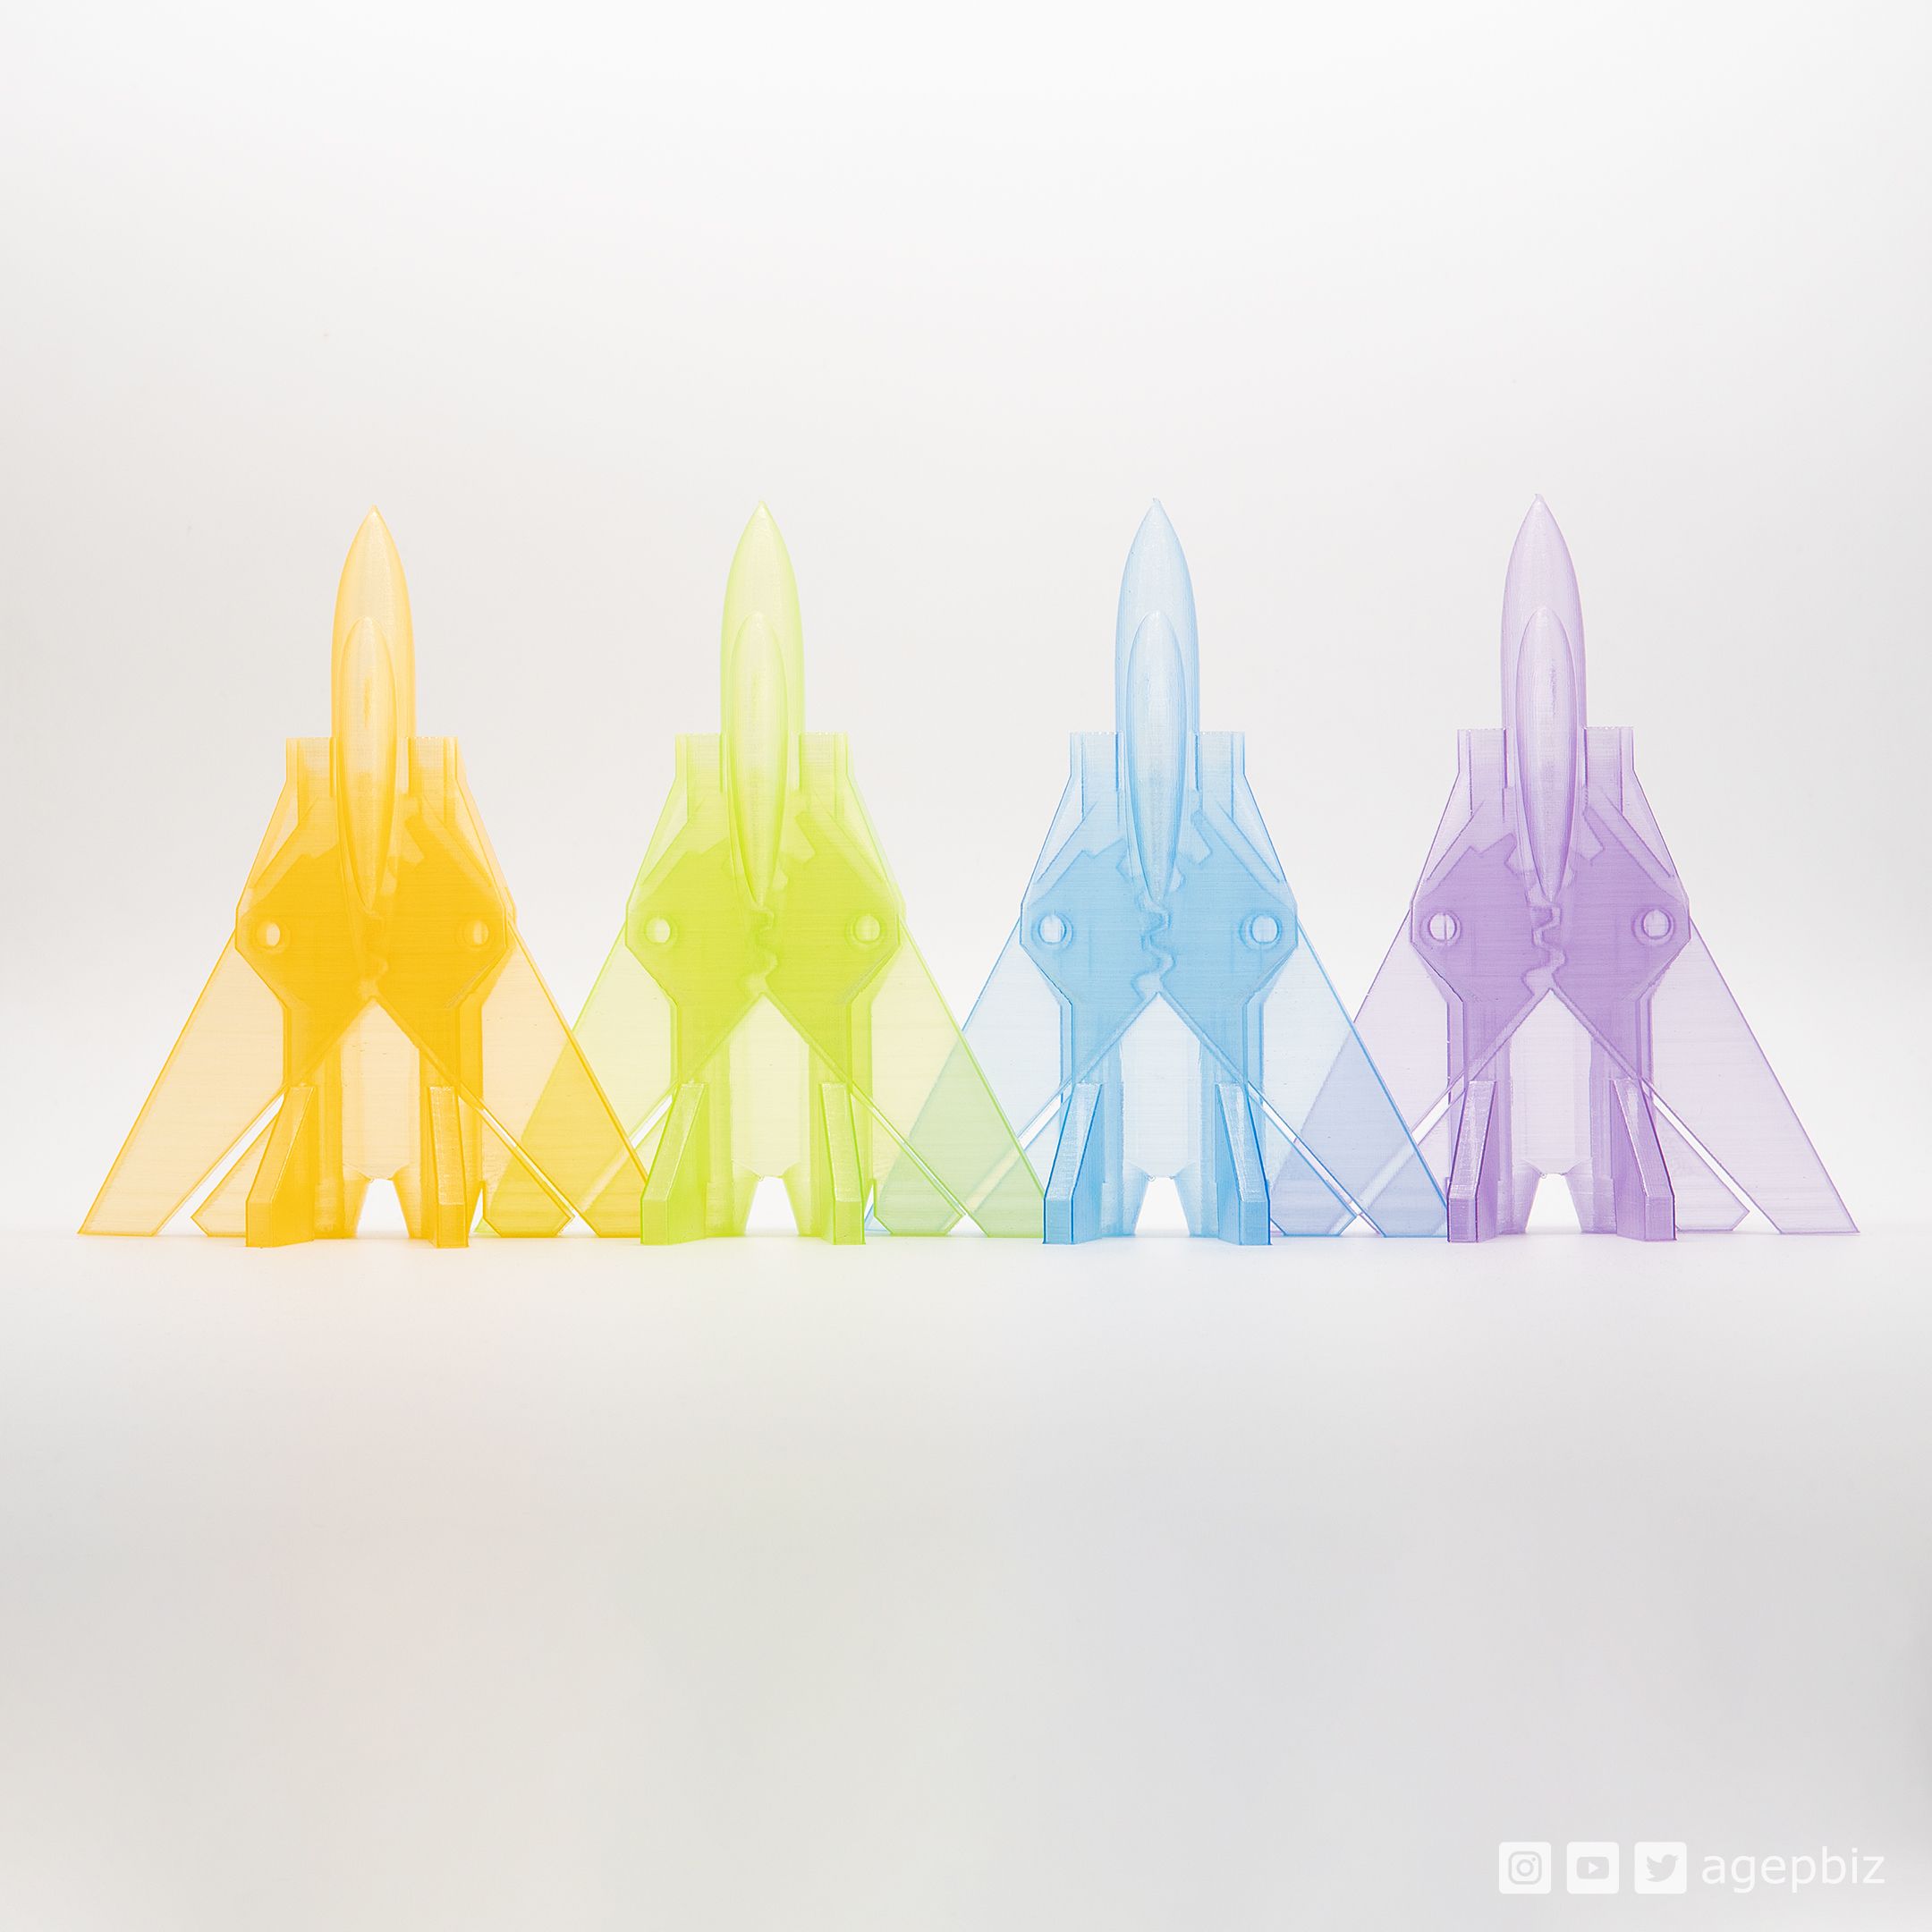 jet_fighter_clear_instagram_agepbiz.jpg Free STL file Surprise Egg #6 - Tiny Jet Fighter・Template to download and 3D print, agepbiz